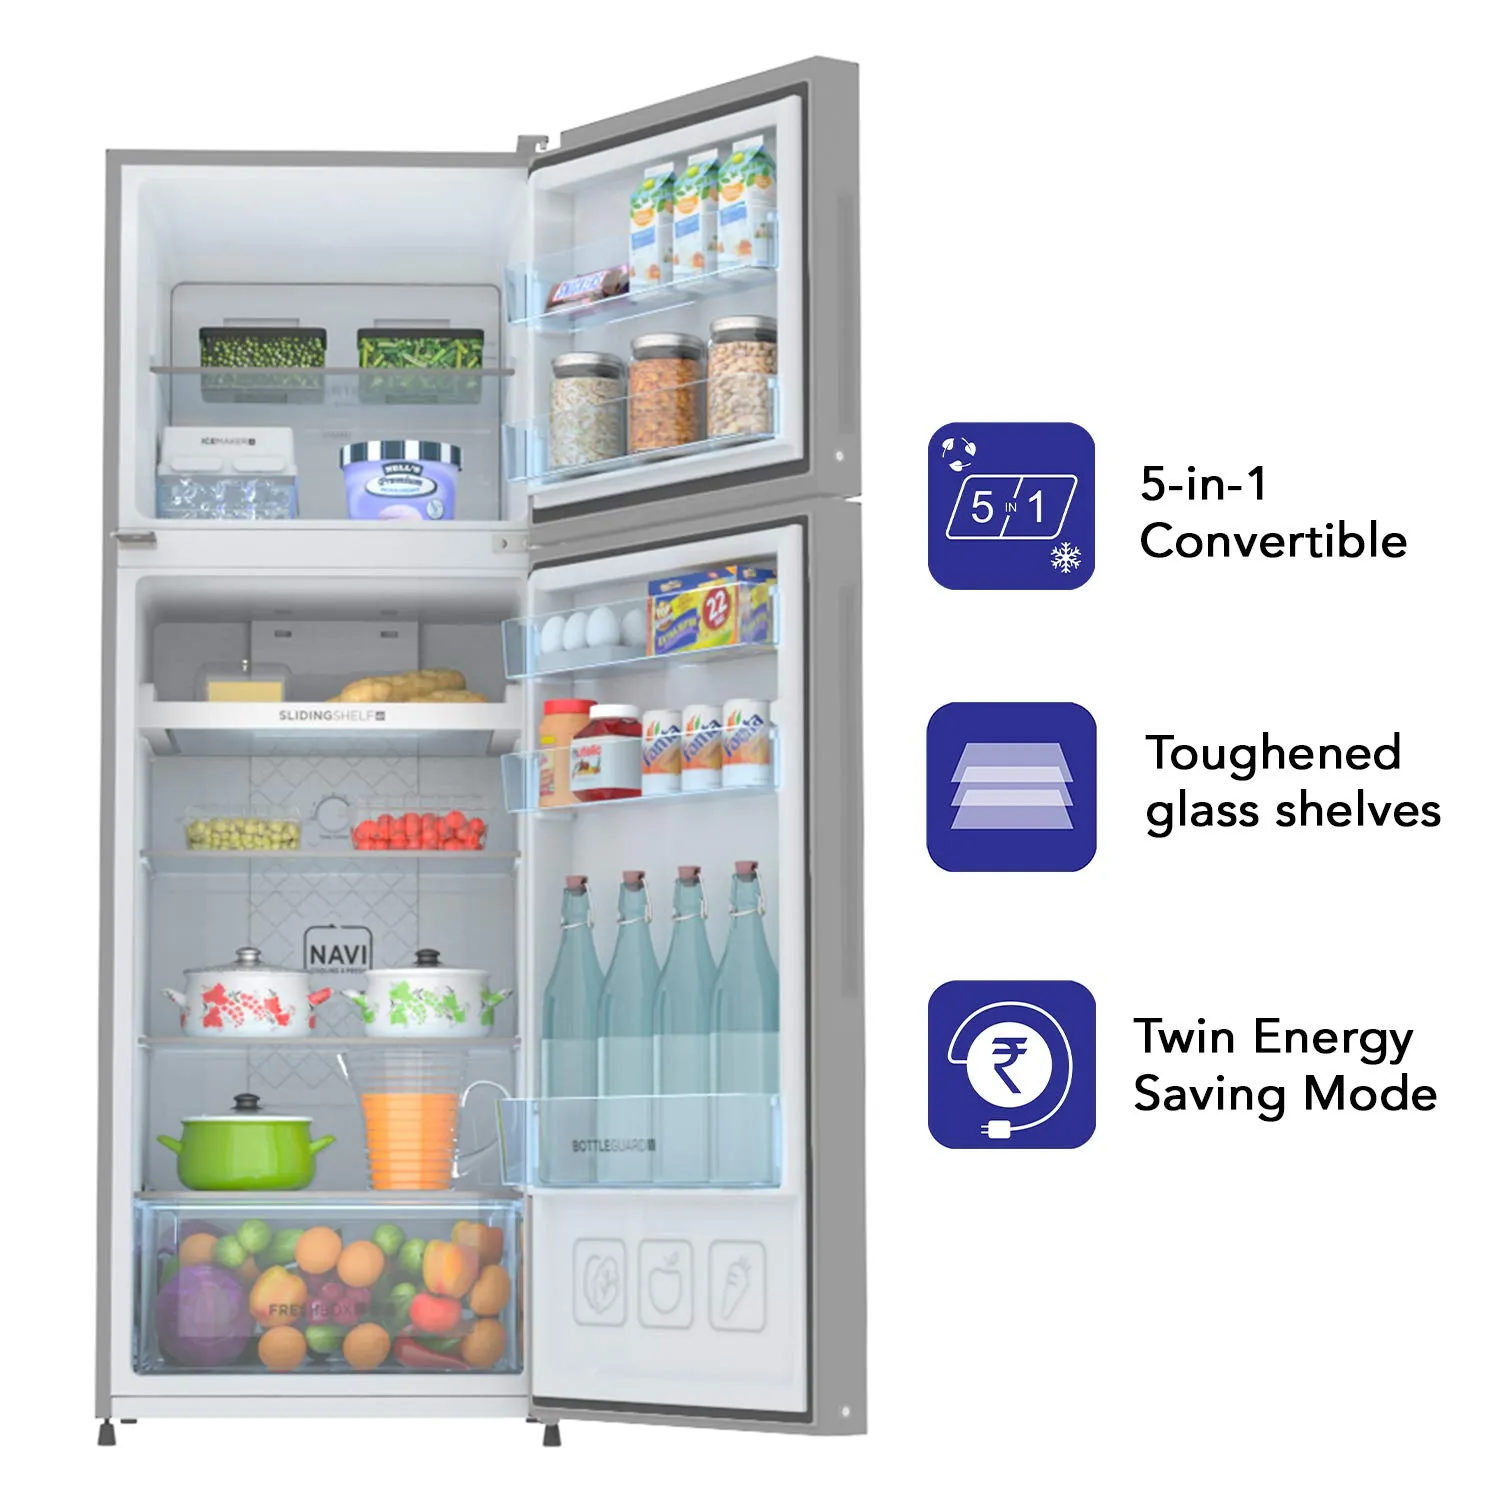 Haier 258 Litres, Frost Free Twin Energy Saving Top Mount Refrigerator